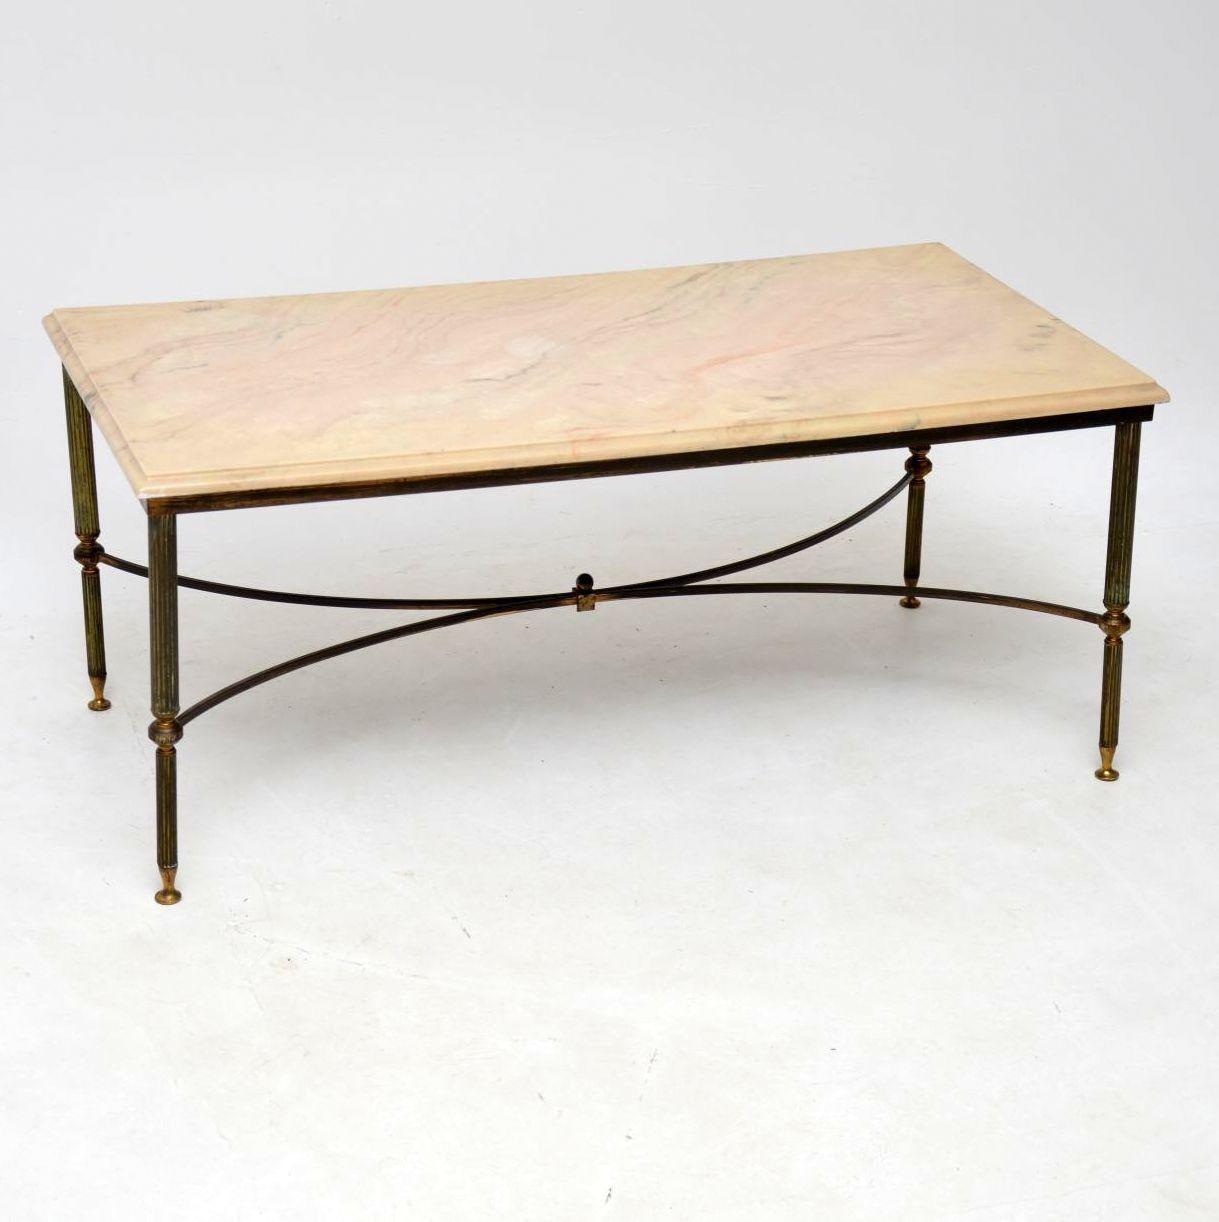 A lovely vintage coffee table with a brass frame and marble top, this was made in France, it dates from around the 1950s-1960s. The brass has some fairly heavy patina which gives it great character, this is just surface wear and there is no real